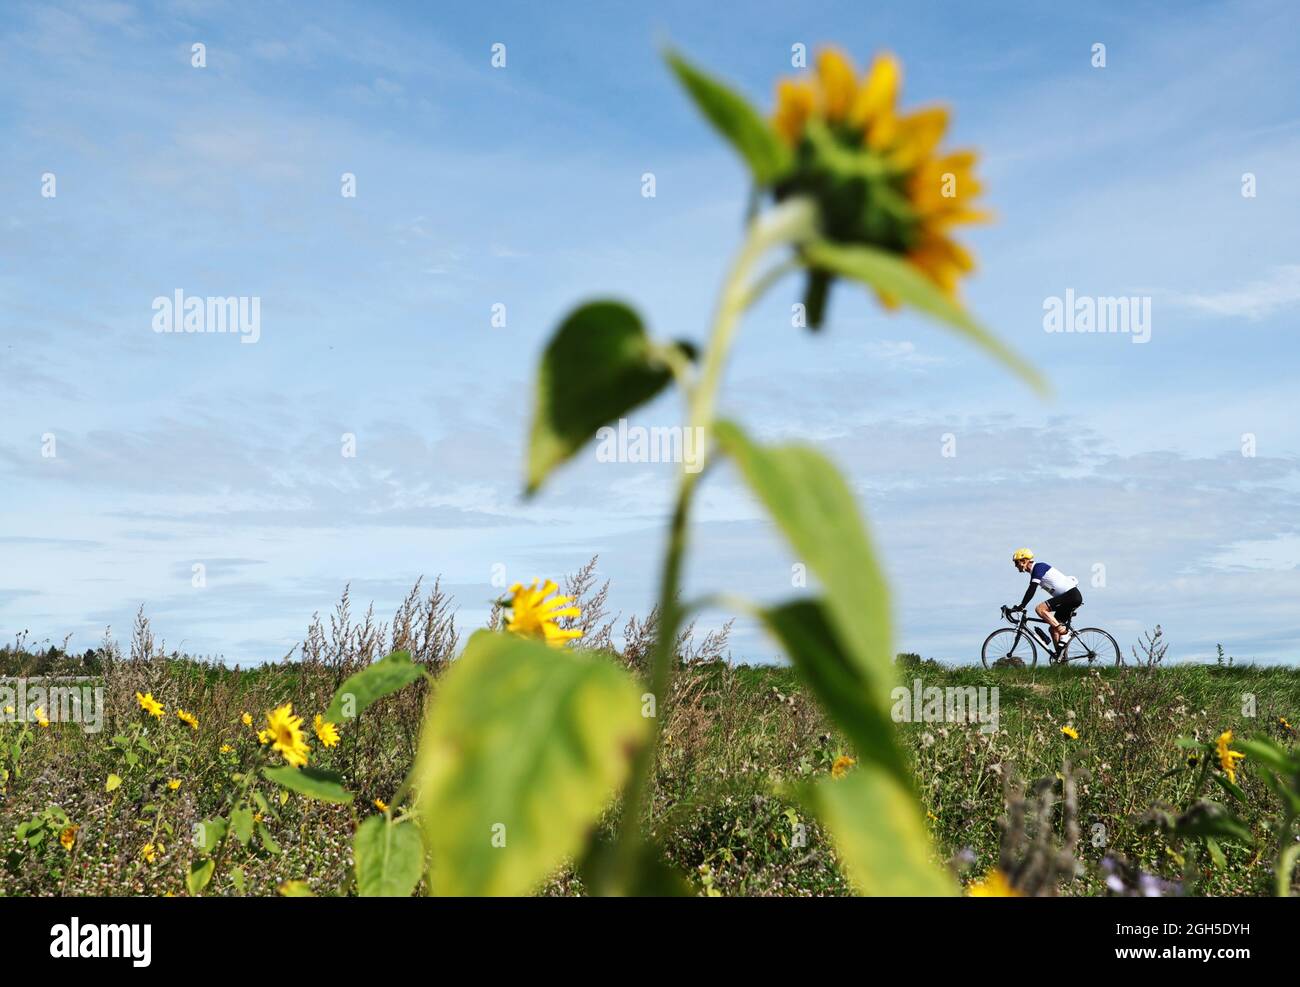 Skänninge, Sweden. 5th, September, 2021. Cyclists passing a field of sunflowers during the Tjejvättern and Halvvättern bicycle exercise races, which are part of the cycling week which includes the world's largest bicycle exercise race, Vätternrundan. The cycling week ends on Sunday. Credit: Jeppe Gustafsson/Alamy Live News Stock Photo